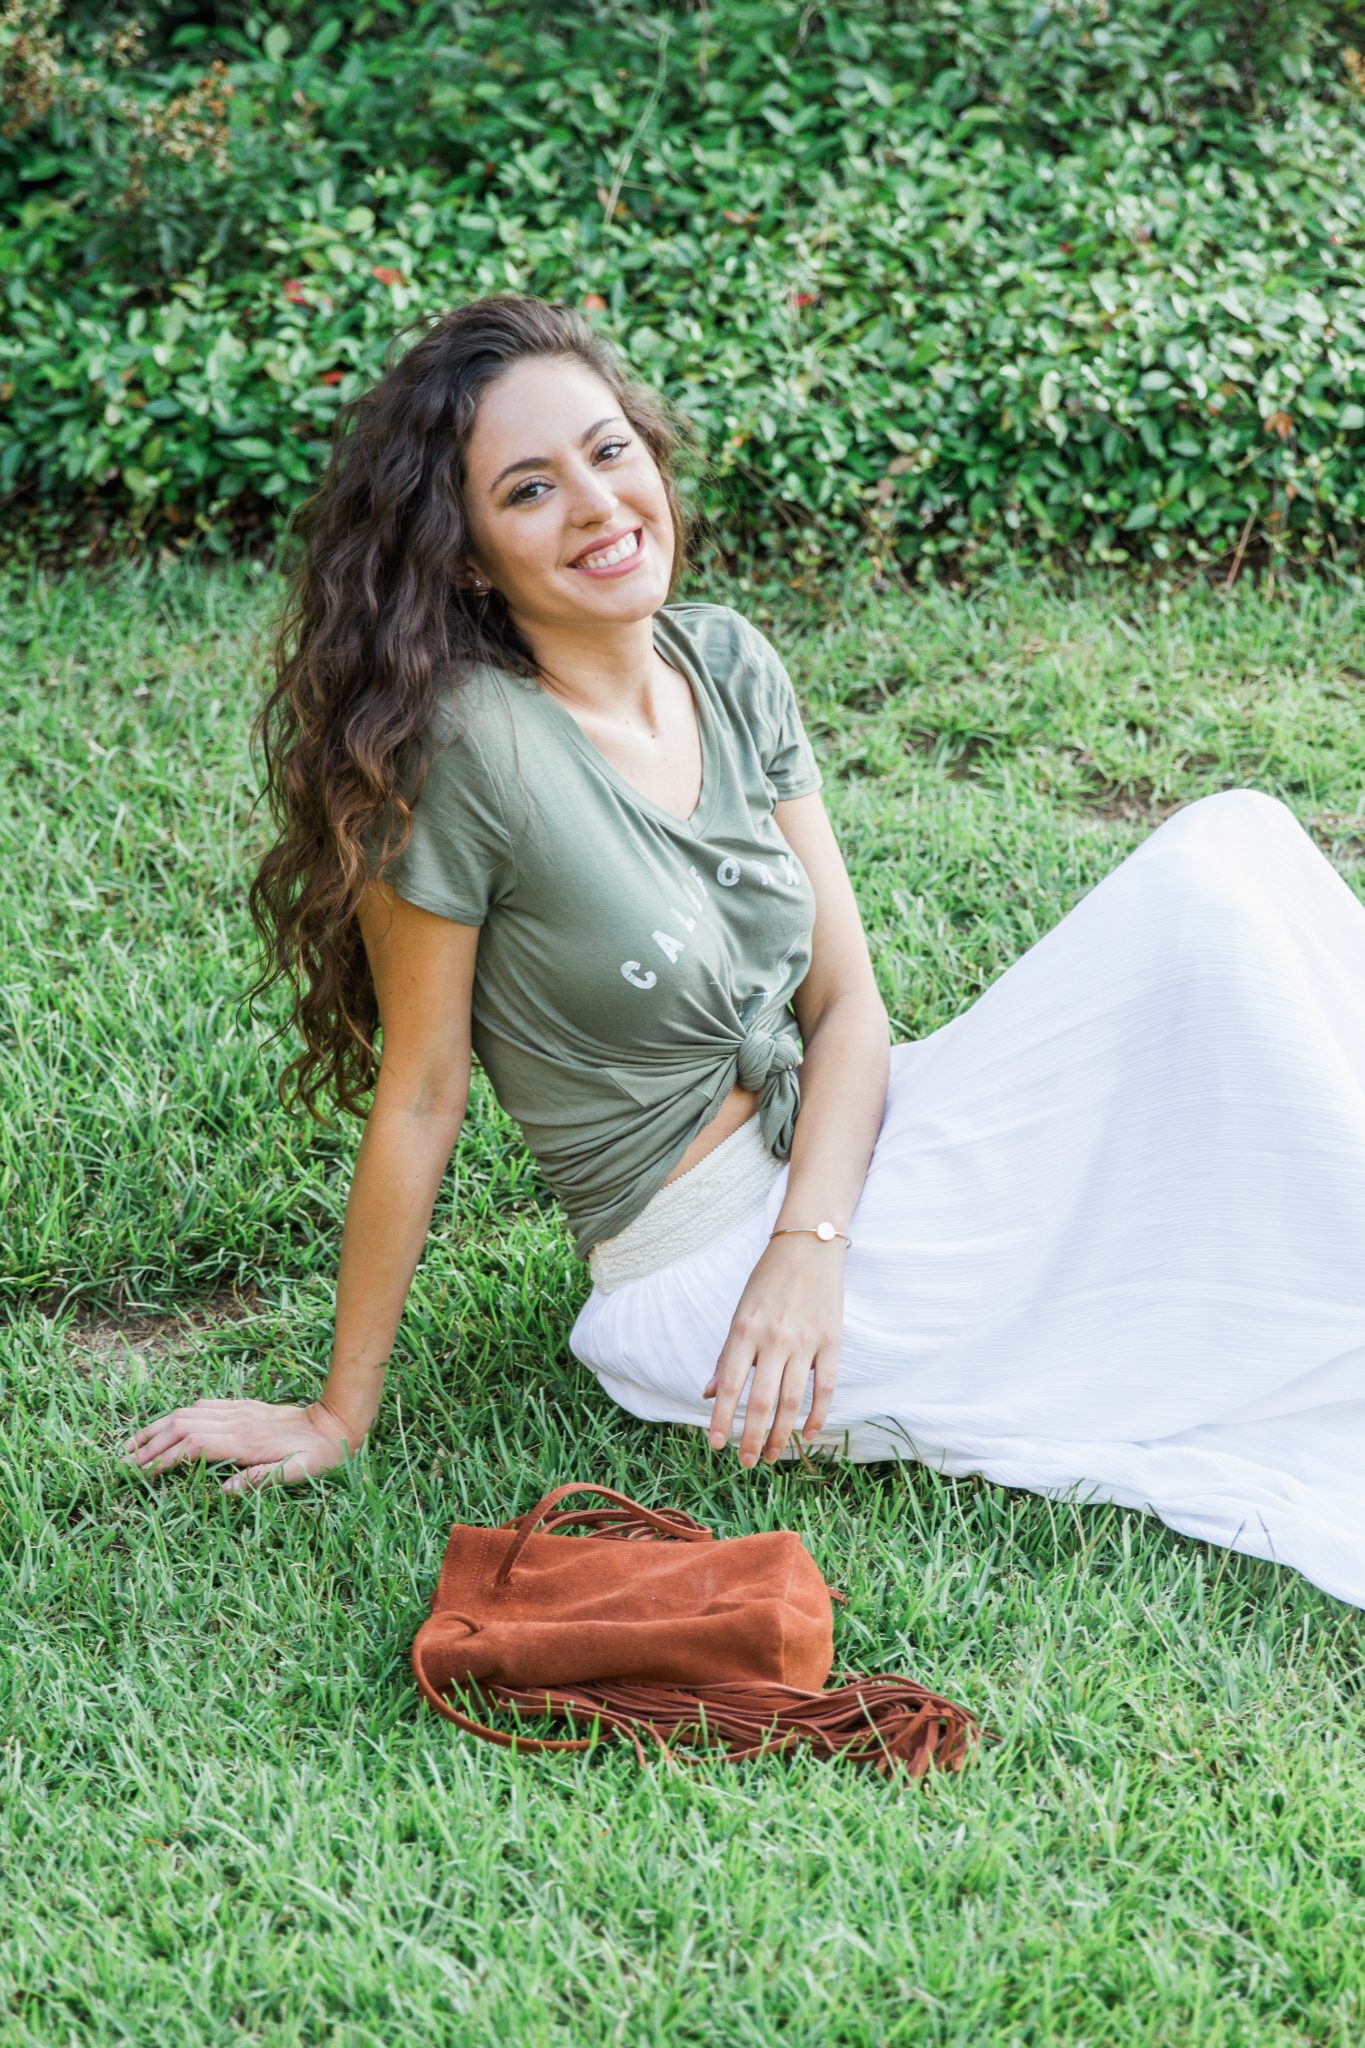 fall festival style, how to wear a maxi skirt for fall, fall boho style, how to style a tshirt with a maxi skirt, white maxi skirt, how to wear lace up booties, comfy fall outfit ideas